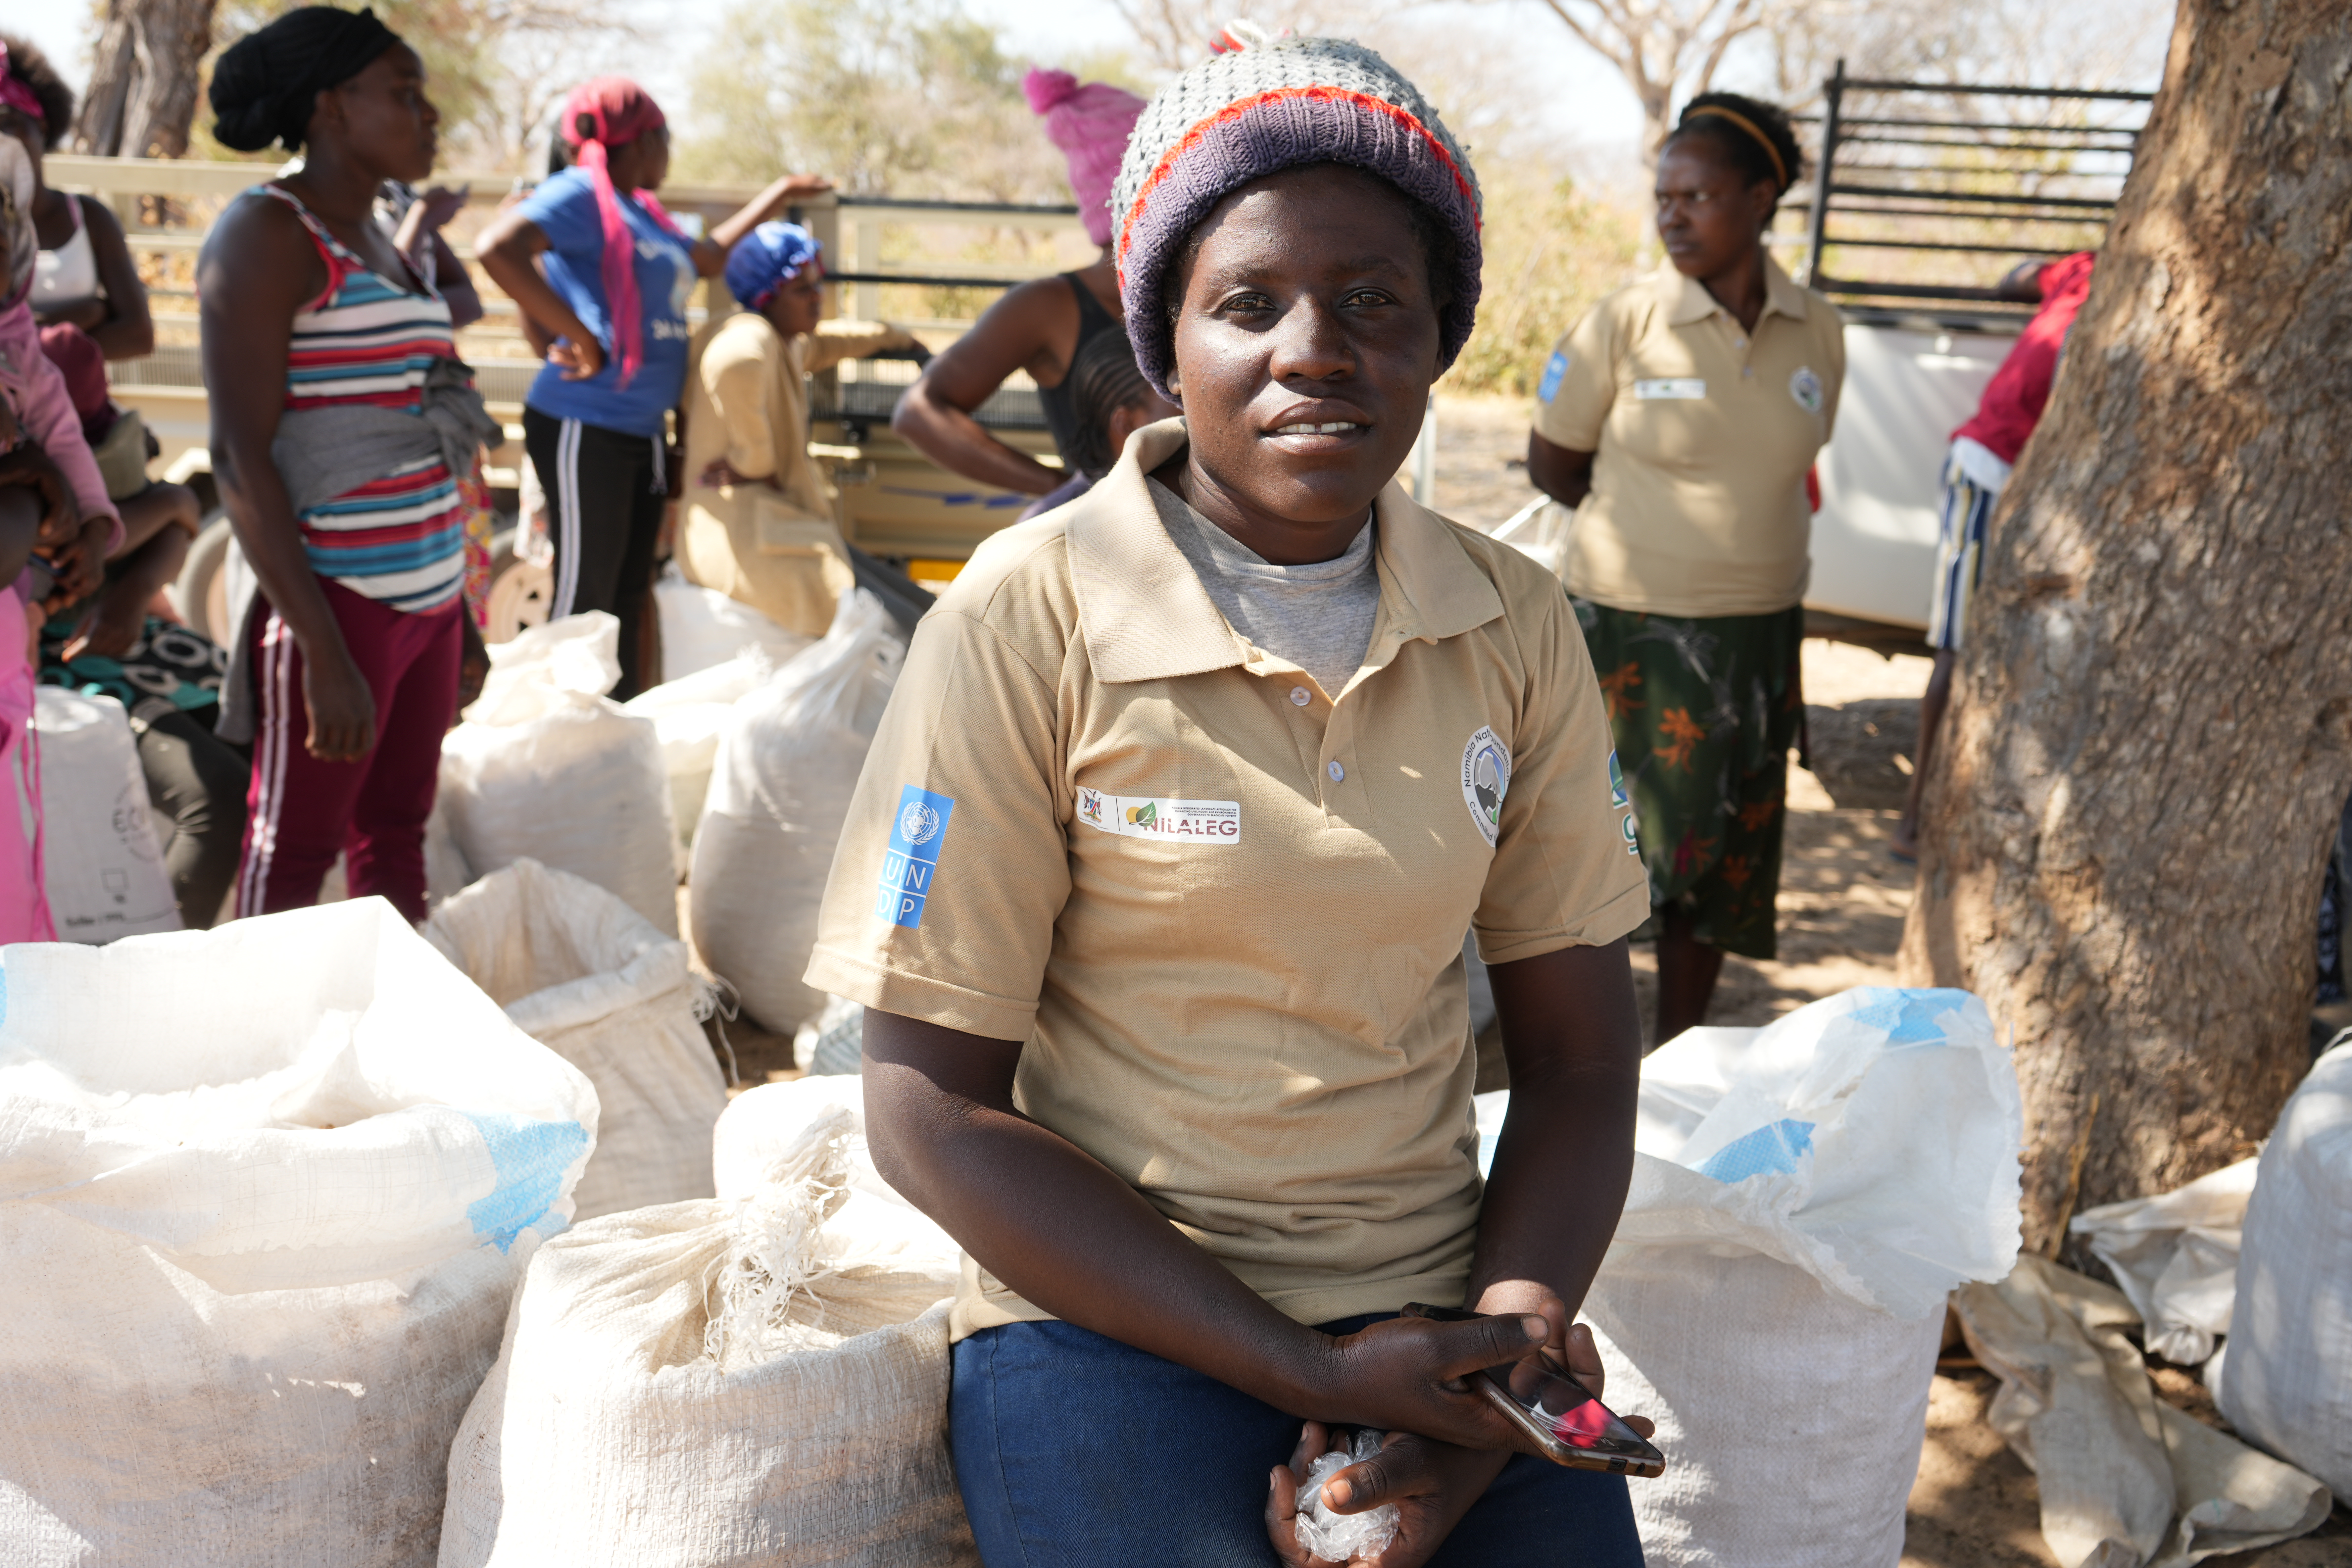 Tresia after submitting her harvest to the buyer, waiting for her income. Photo: UNDP Namibia/Frieda Lukas